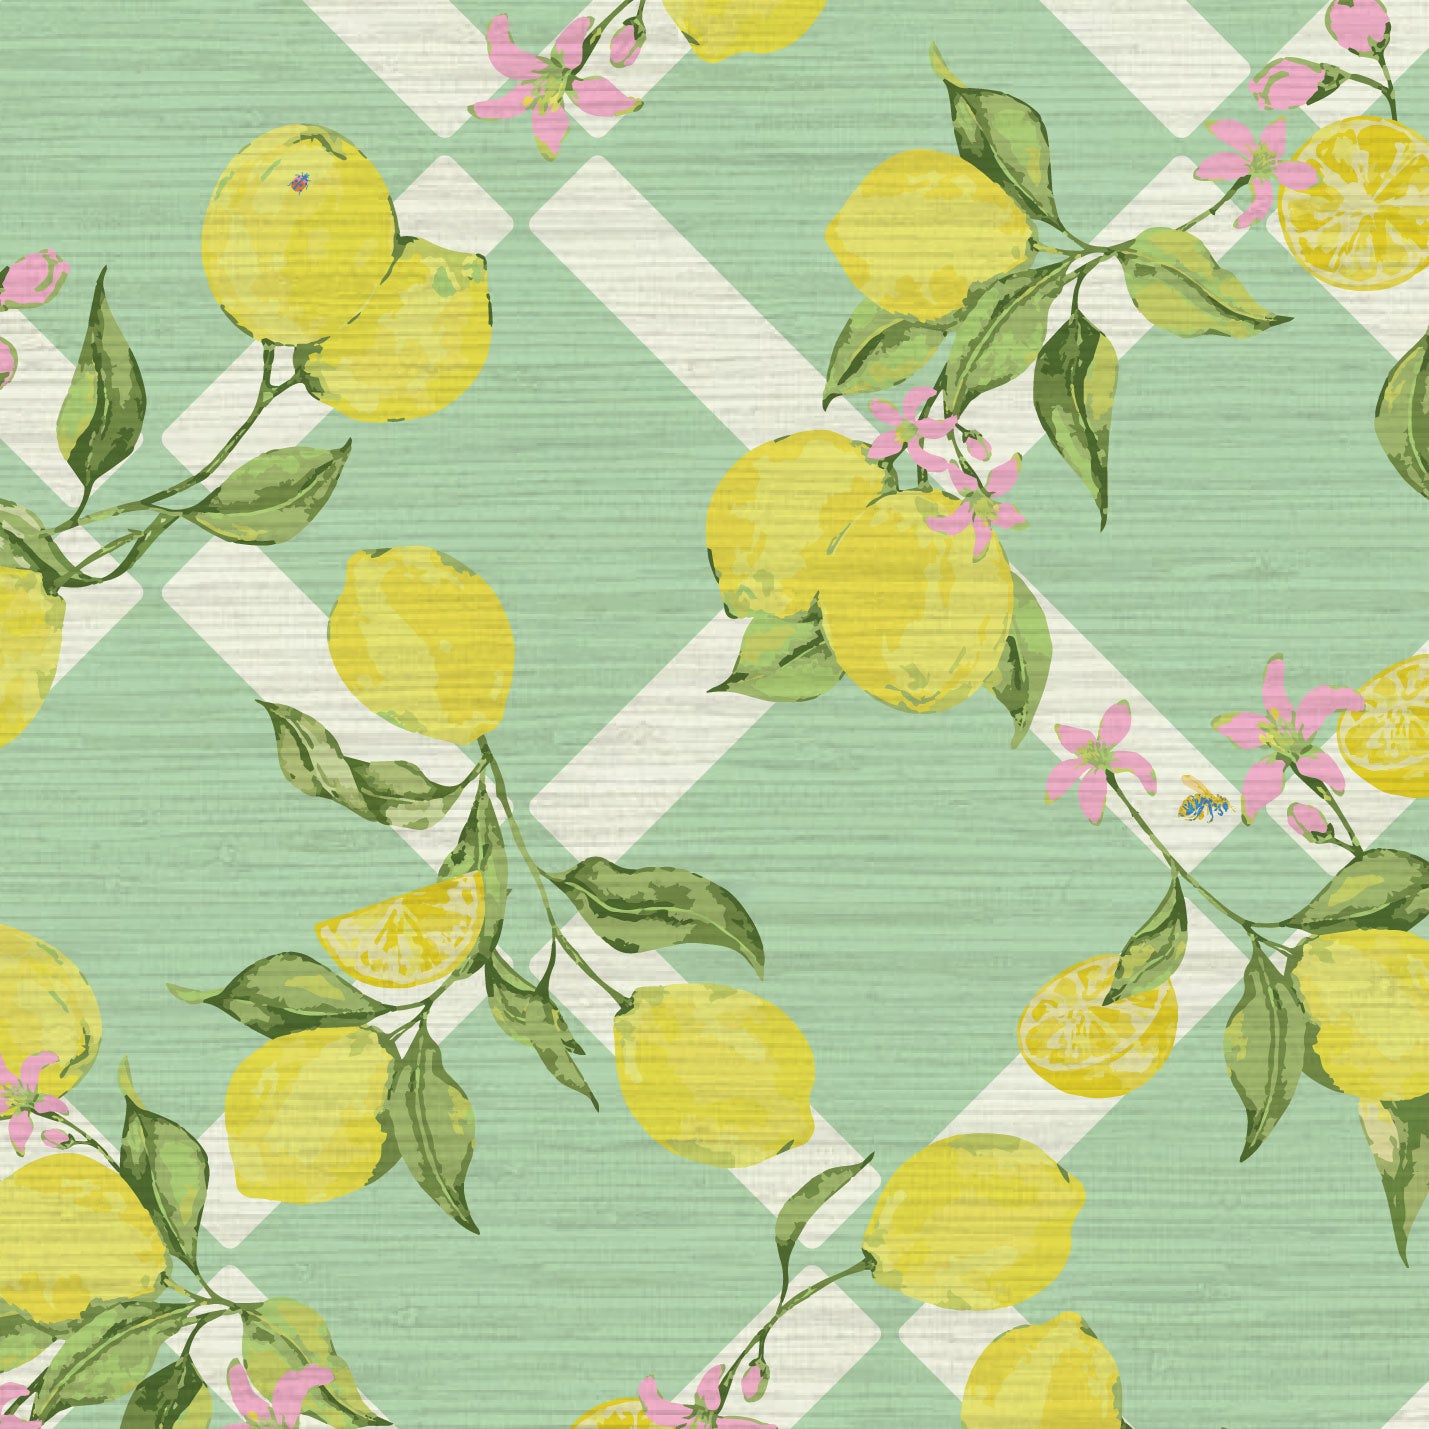 Grasscloth wallpaper Natural Textured Eco-Friendly Non-toxic Sustainable Interior Design Retro chic Grand millennial Maximalism Traditional Dopamine decorCoastal Garden Seaside Seashore Waterfront Vacation home styling Retreat Relaxed beach vibes Beach cottage Shoreline Oceanfront preppy Nature inspired Vertical Grid lemons fruit food Cottage core Countryside Vintage Imperfect Rural Farm core rustic stripe yellow pink flowers lattice botanical yellow green leaf pale baby kids sky green mint sage